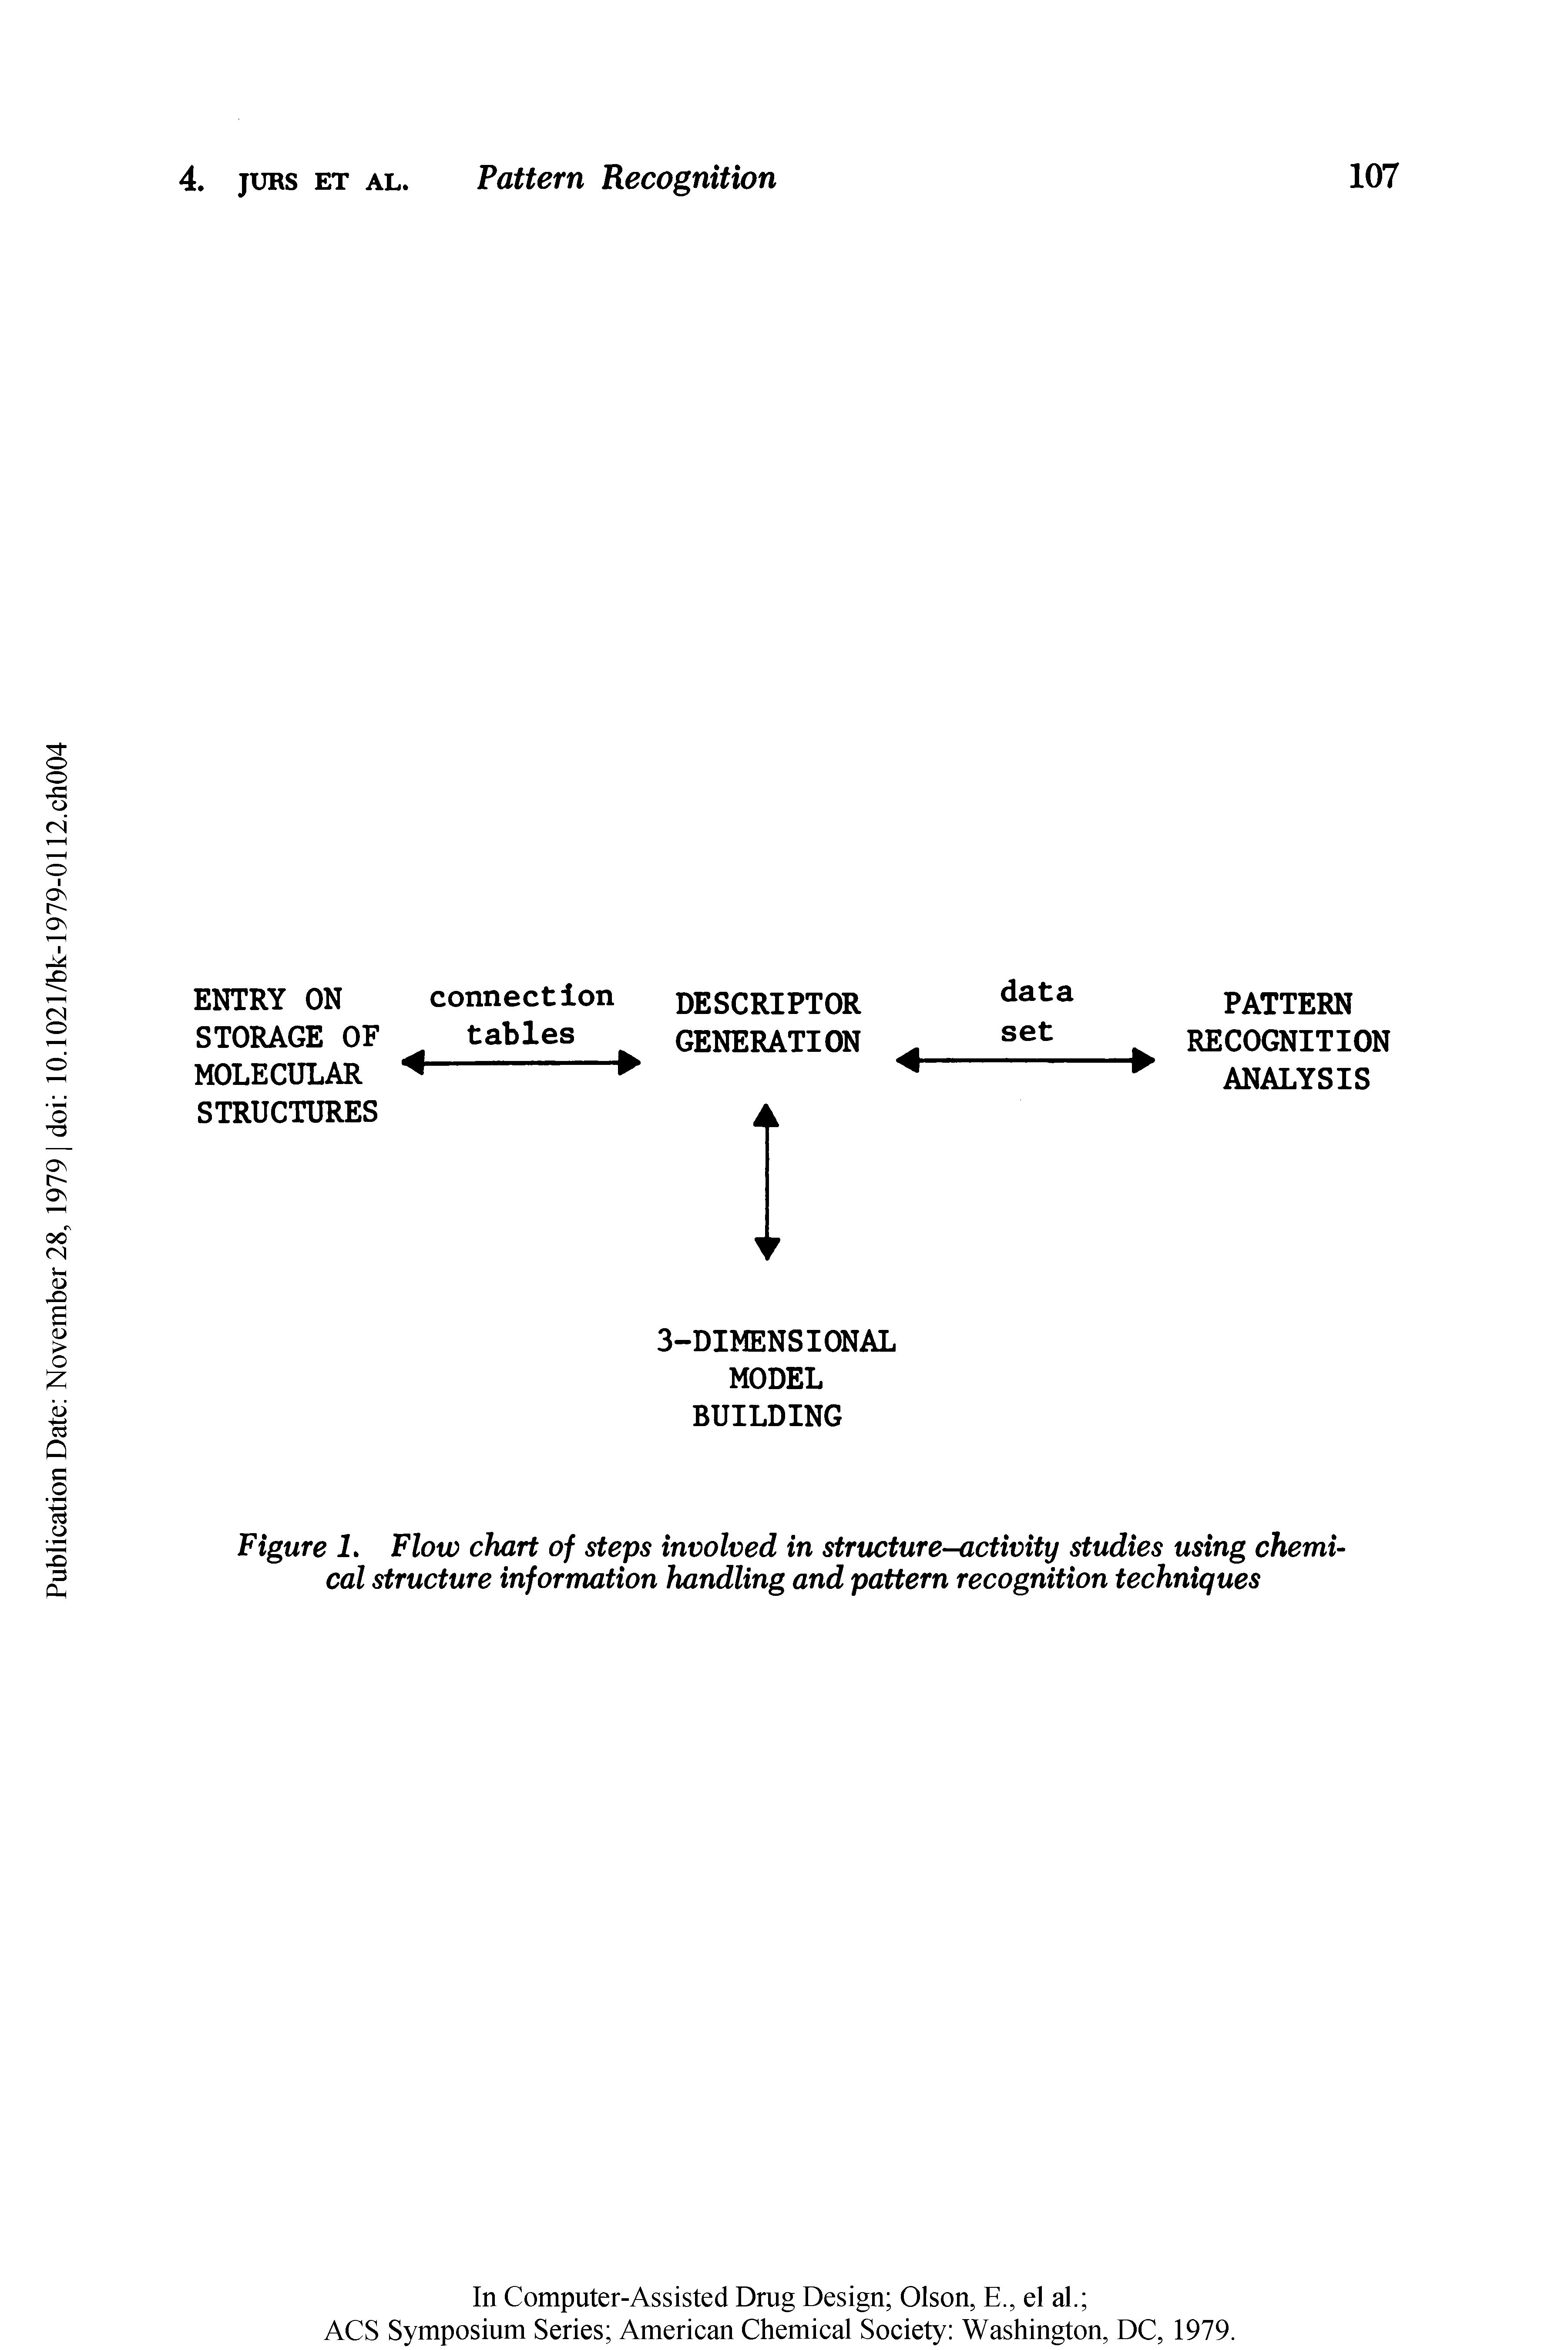 Figure I. Flow chart of steps involved in structure-activity studies using chemical structure information handling and pattern recognition techniques...